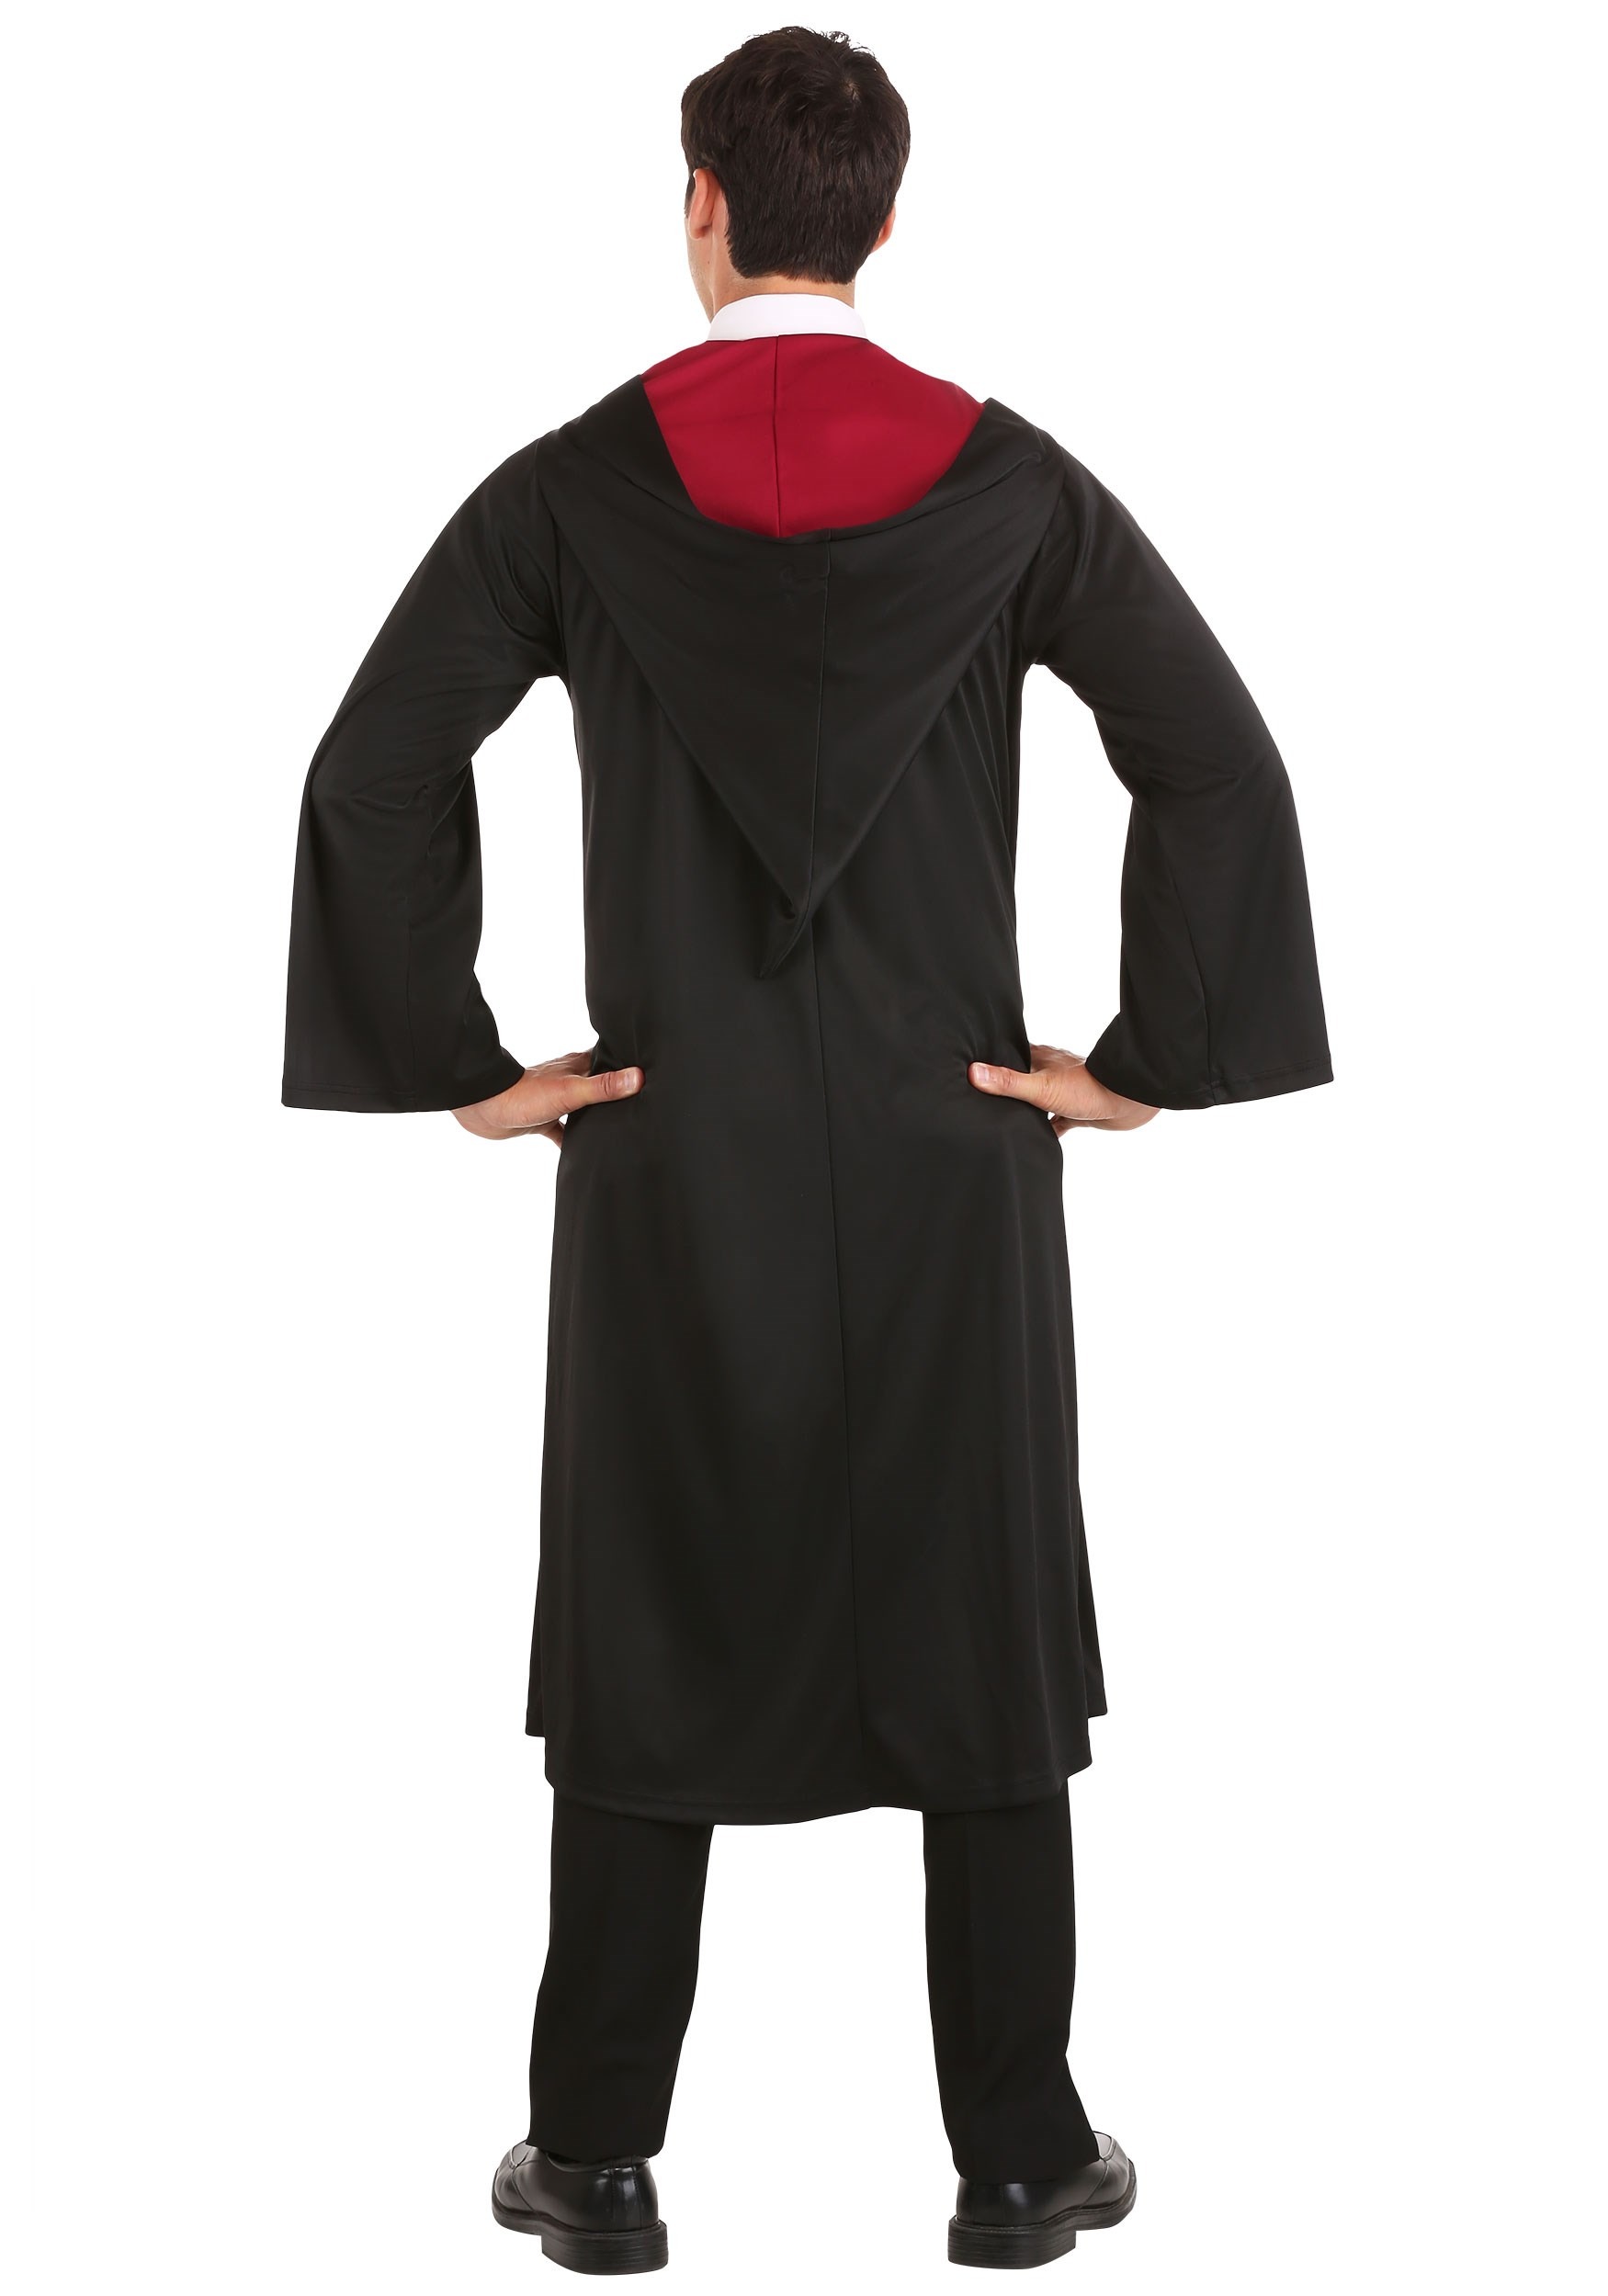 Harry Potter Gryffindor Robe For Adults